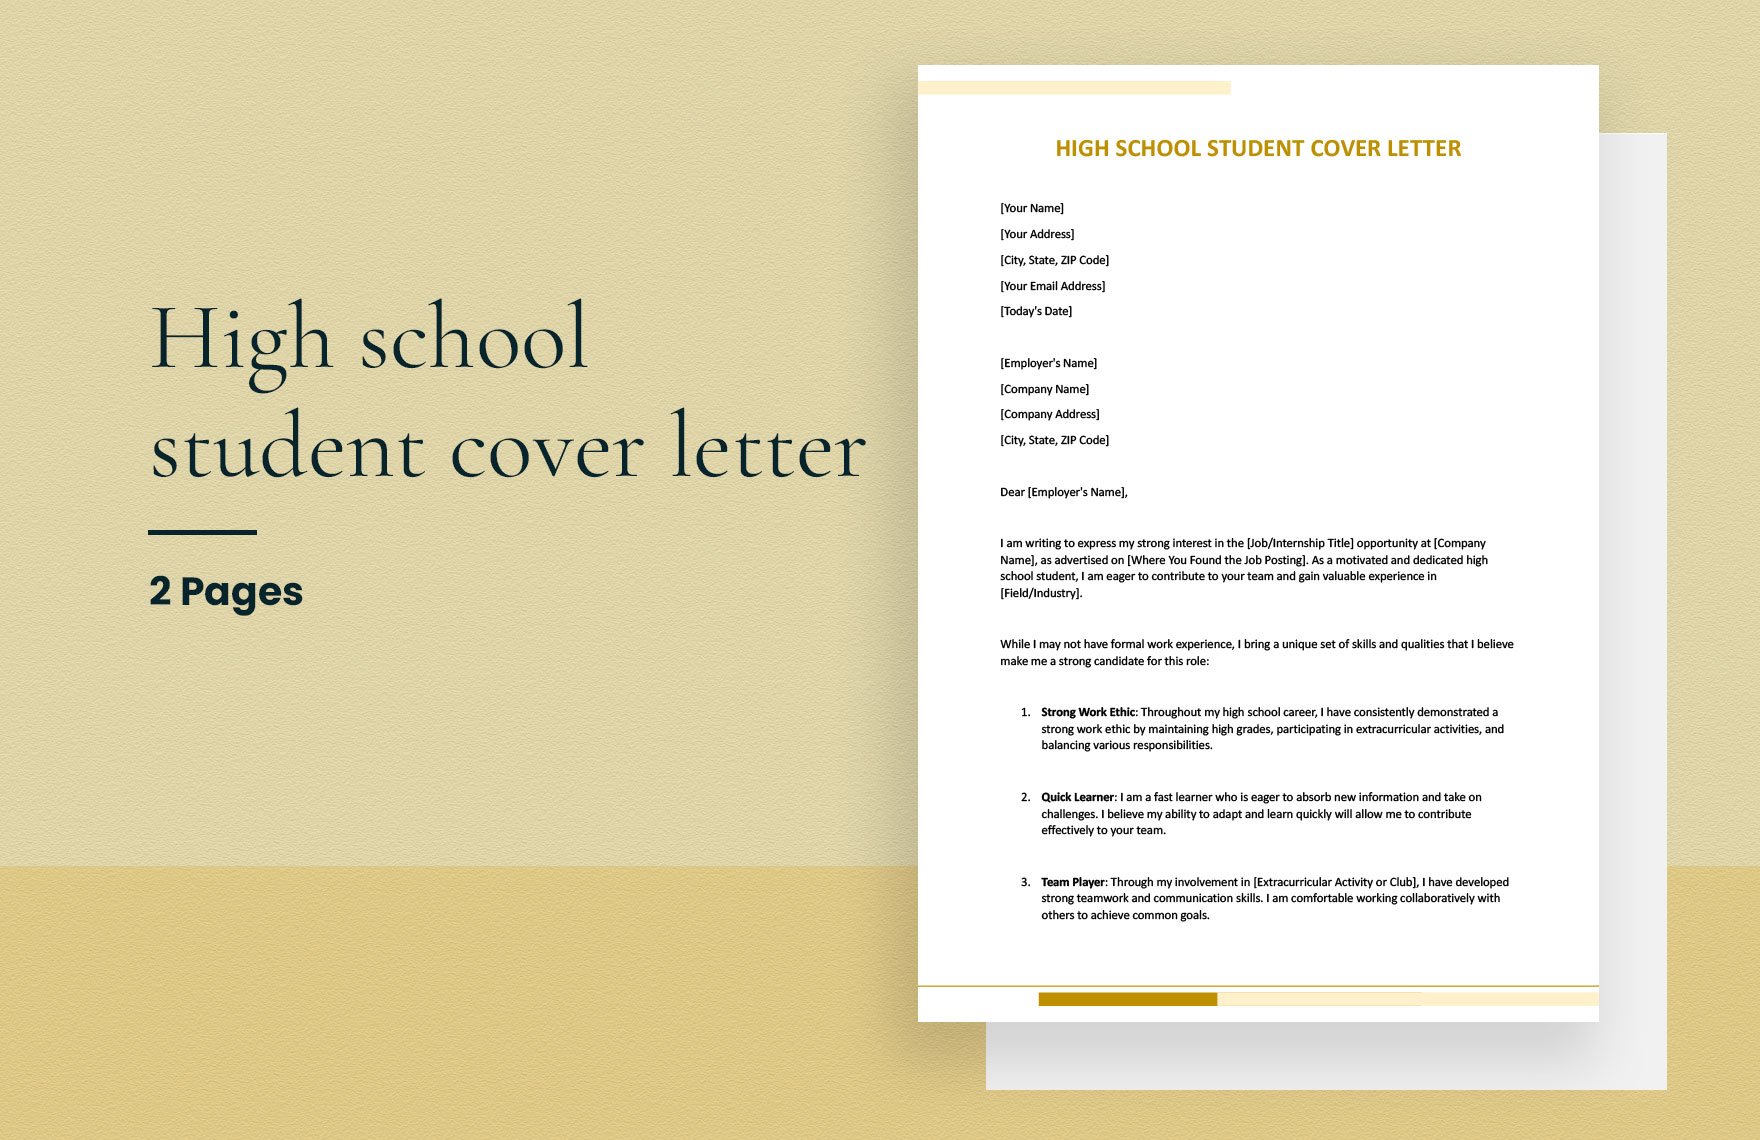 High school student cover letter in Word, Google Docs